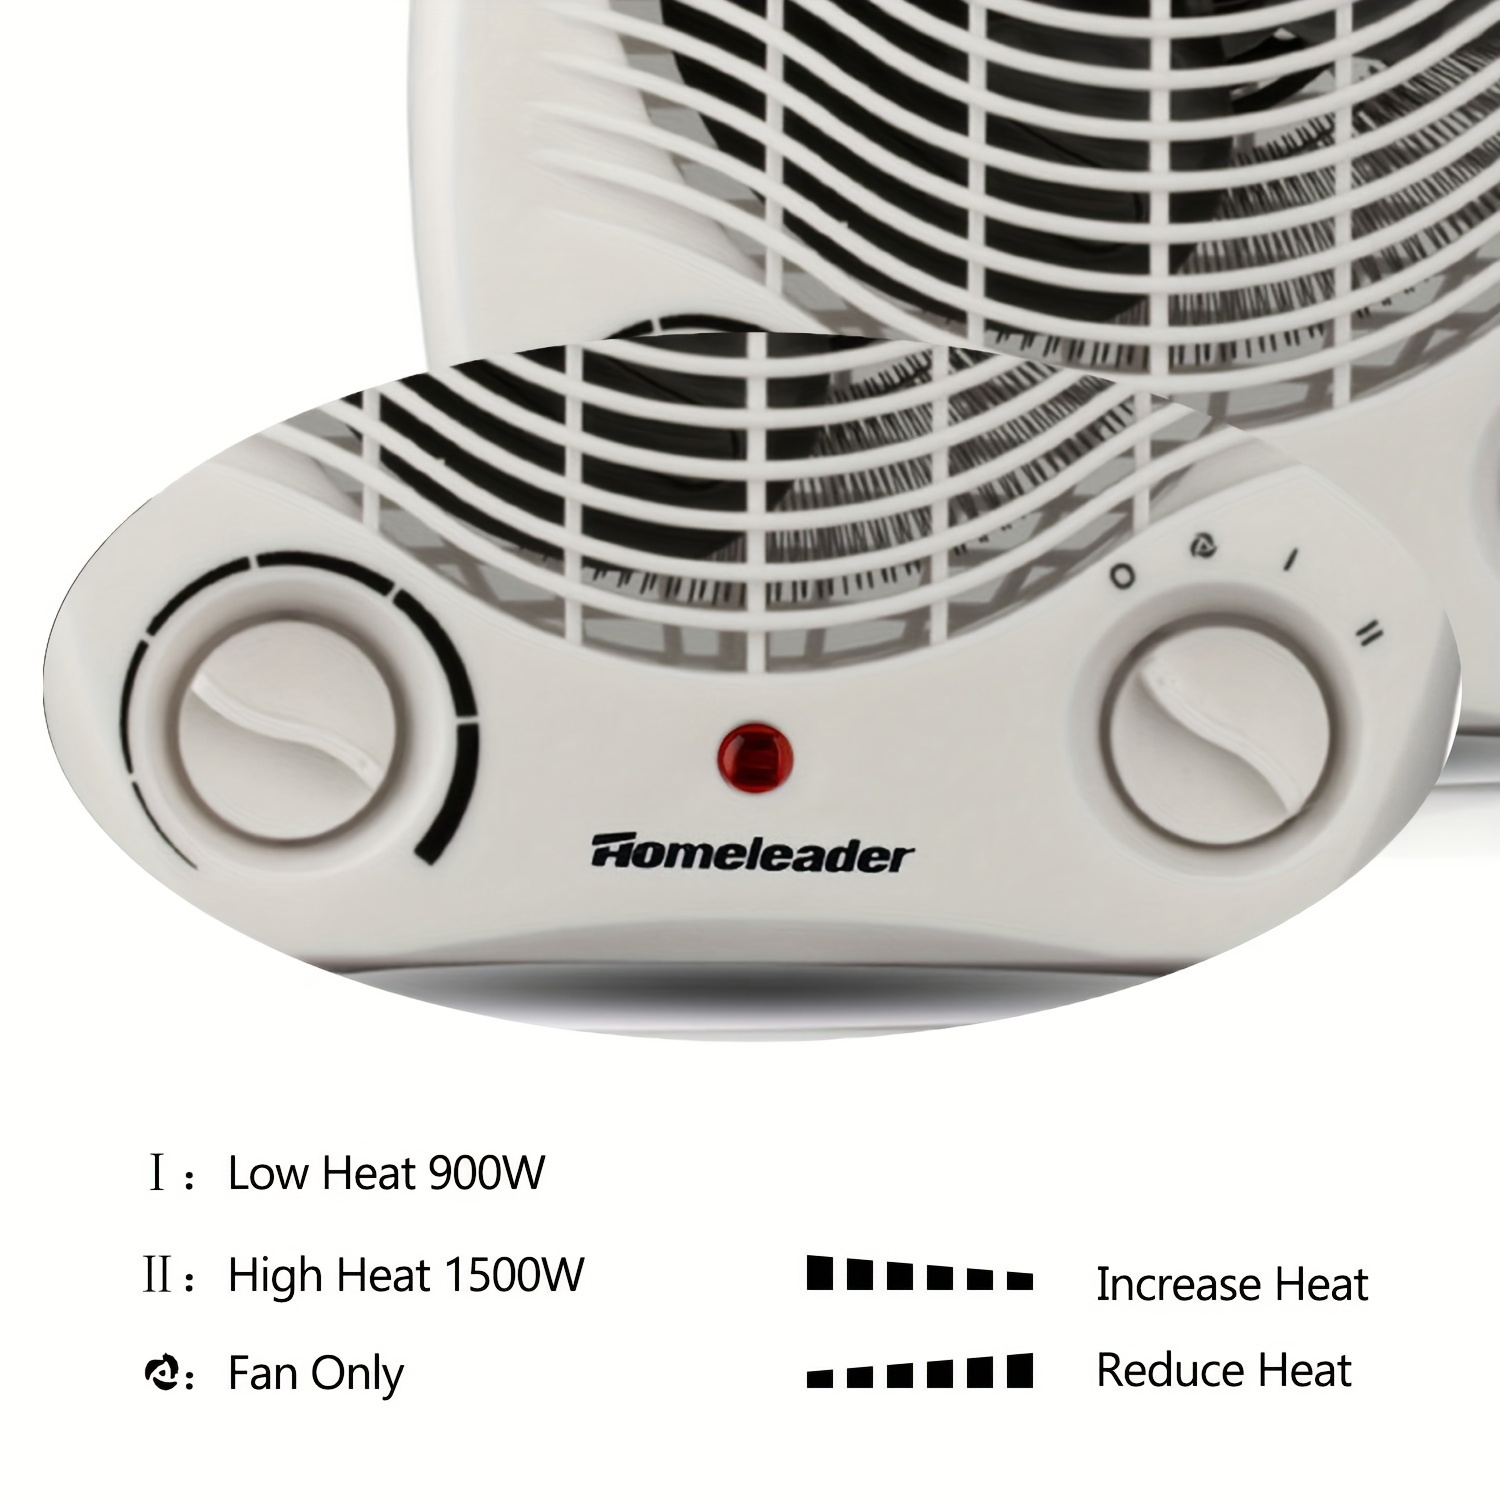 1500 W 2 in 1 Mini Portable Space Ceramic Heater Cooling Fan with Overheat Protection-White